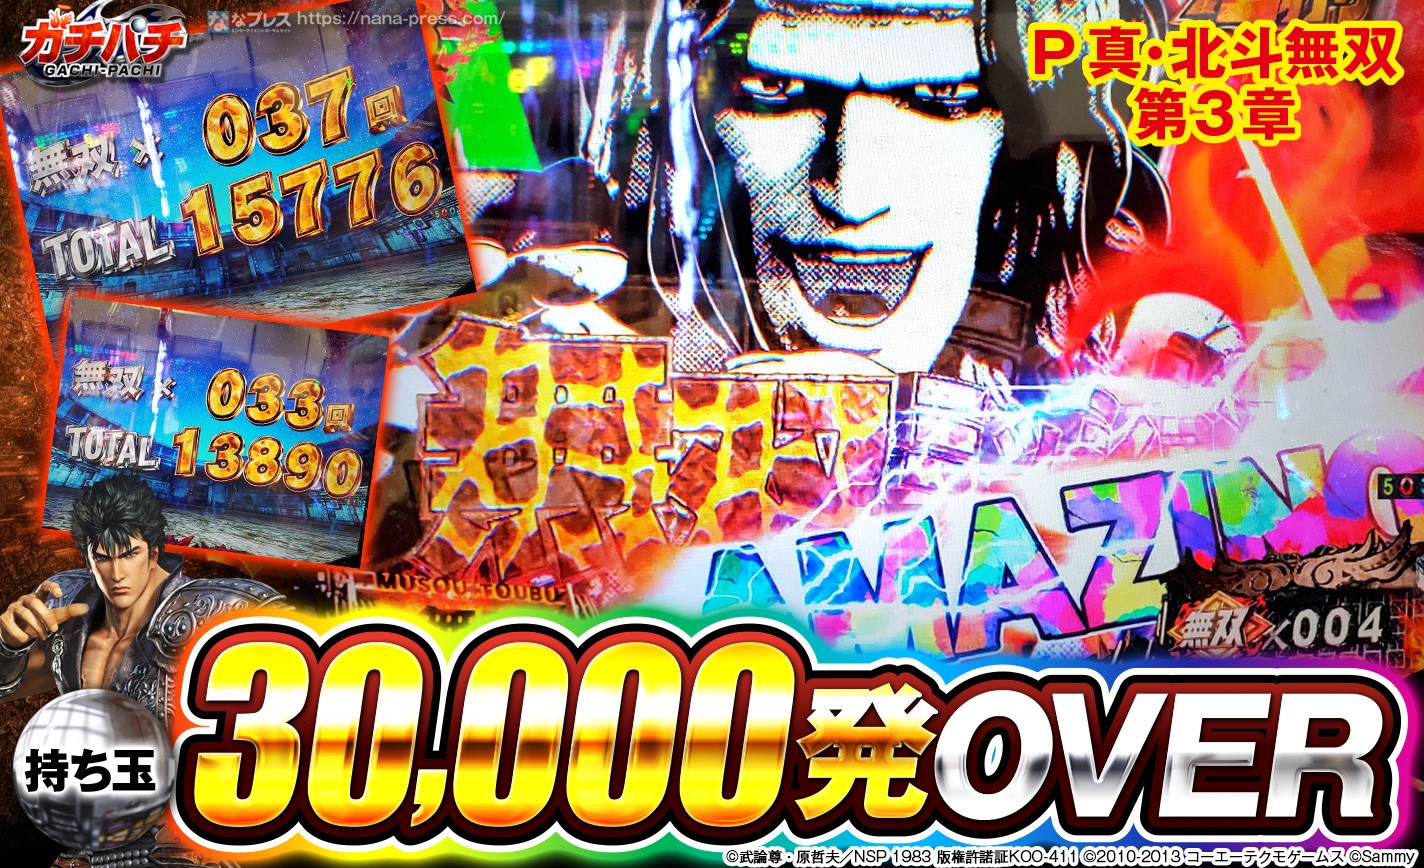 【P真・北斗無双 第3章】初当たりが全てラッシュに入り持ち玉30000発OVER！ eyecatch-image